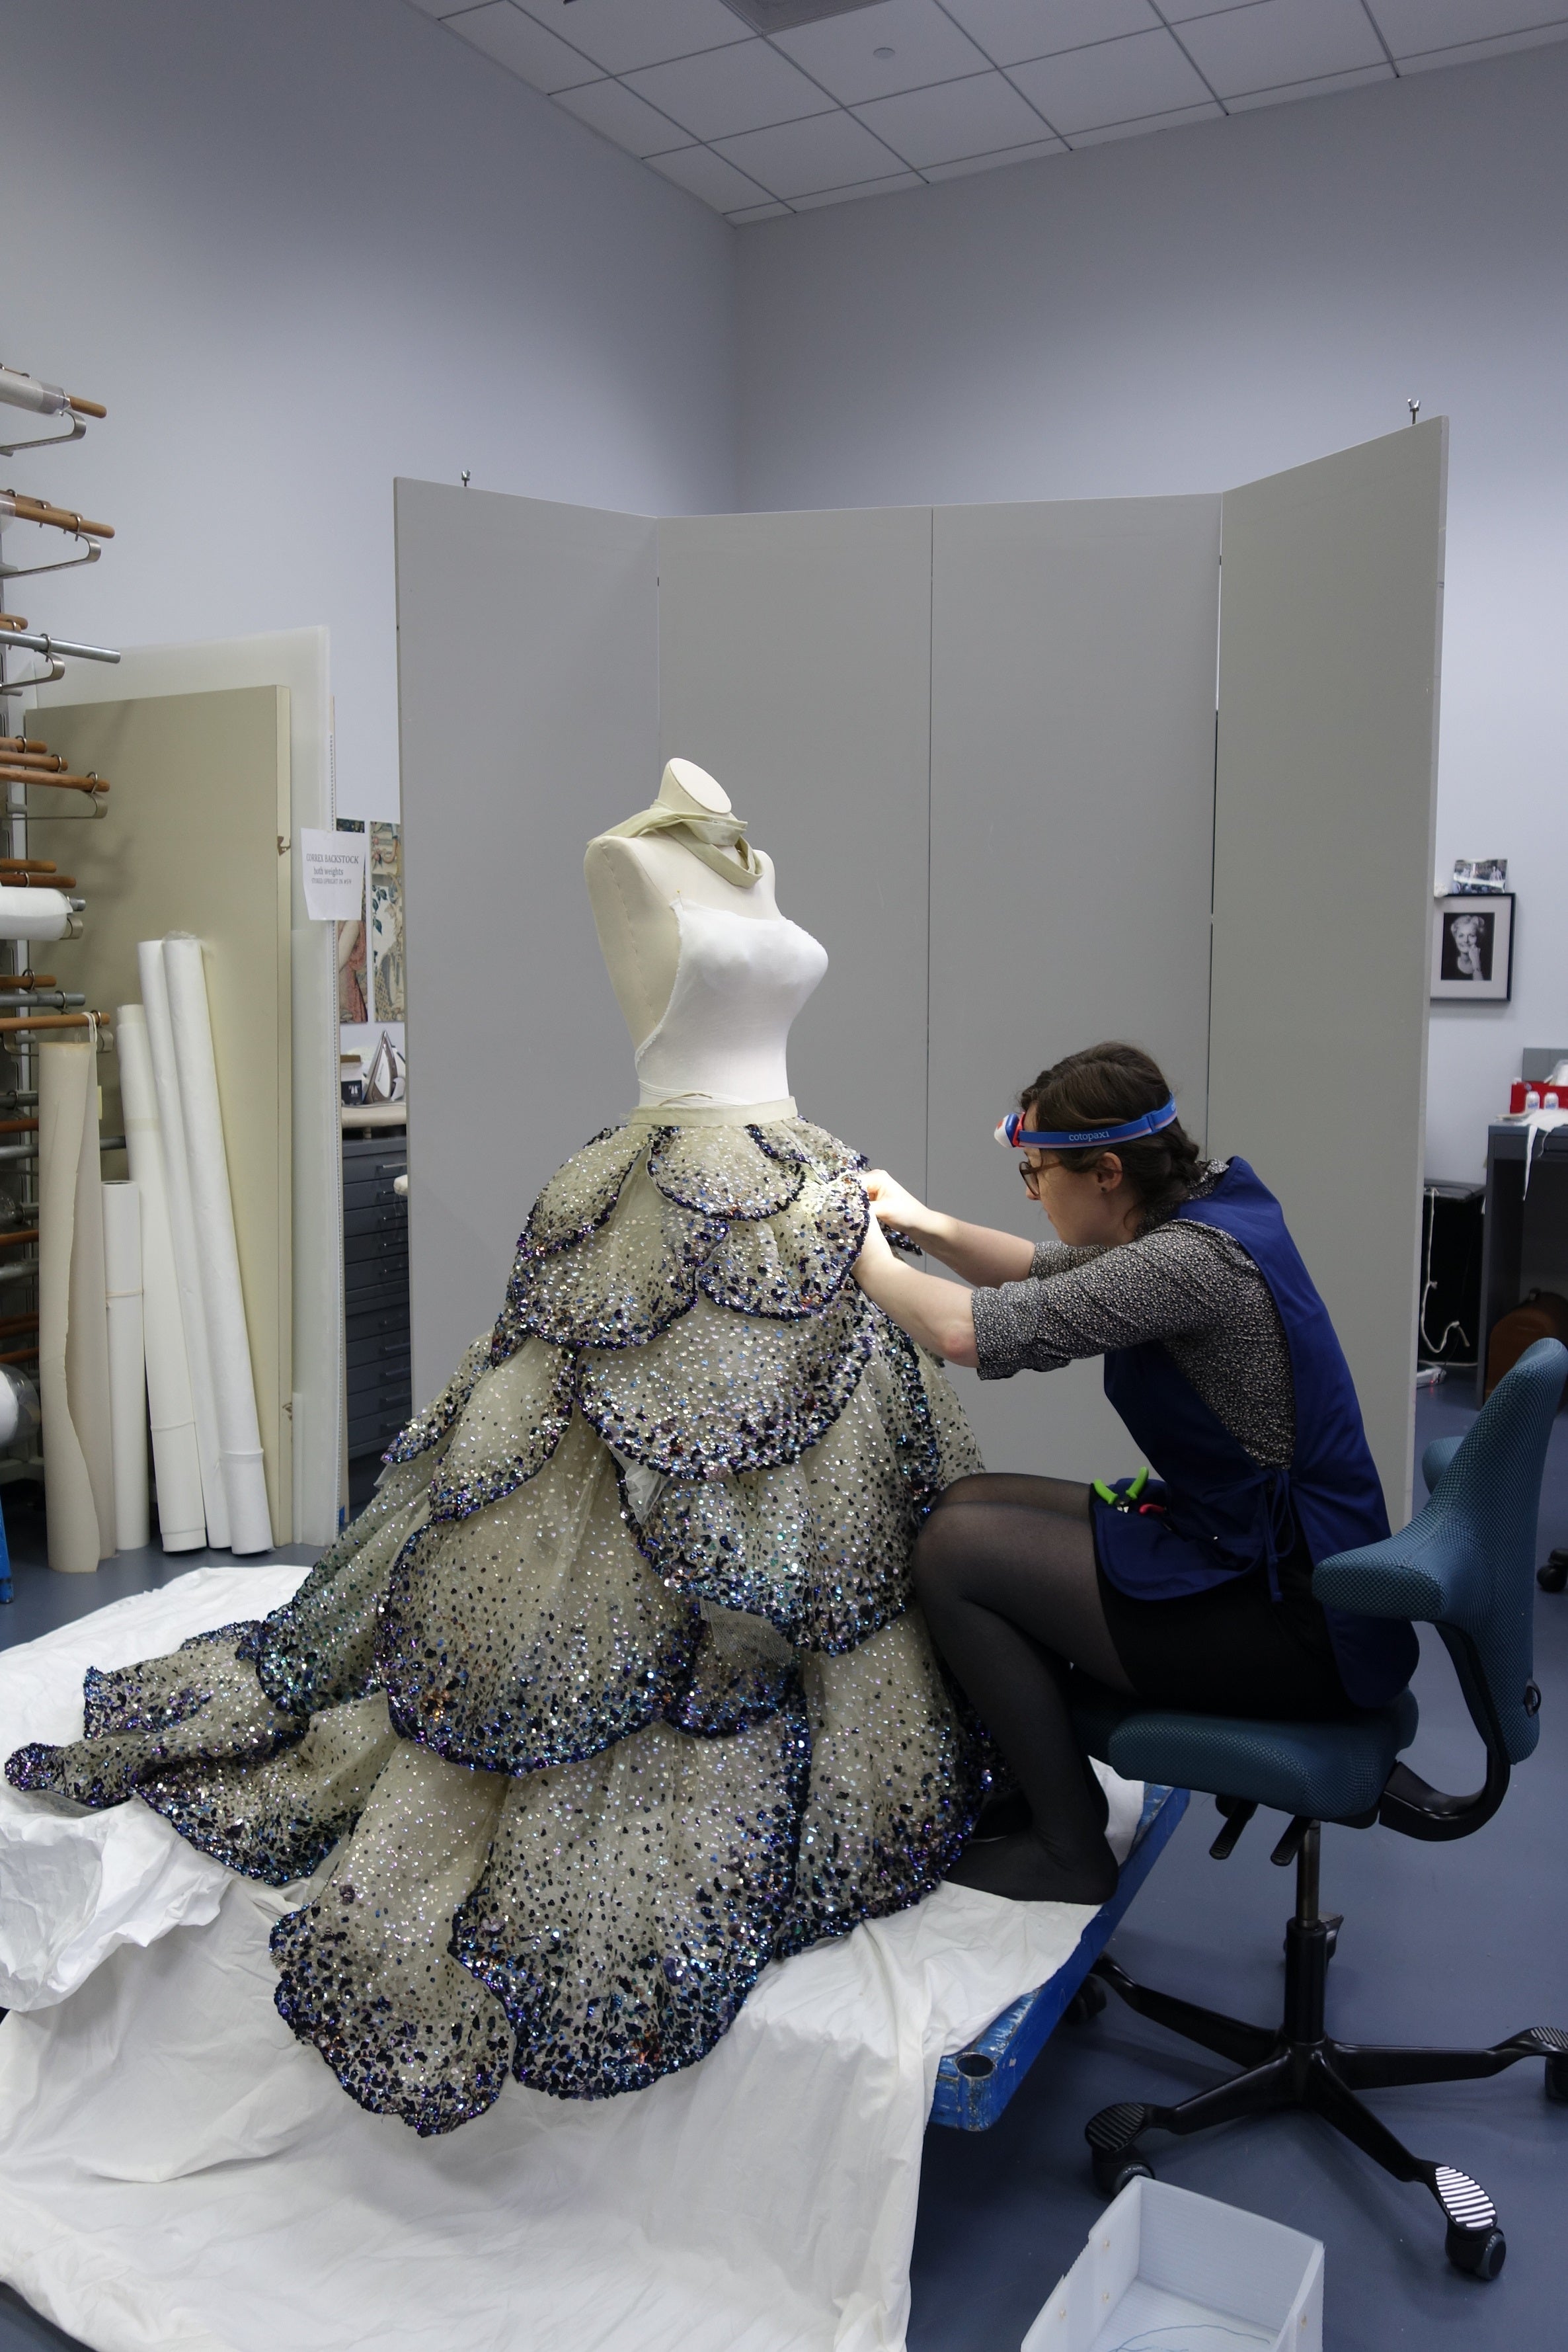 Watch: The Making-Of Christian Dior Fall 2023 Haute Couture